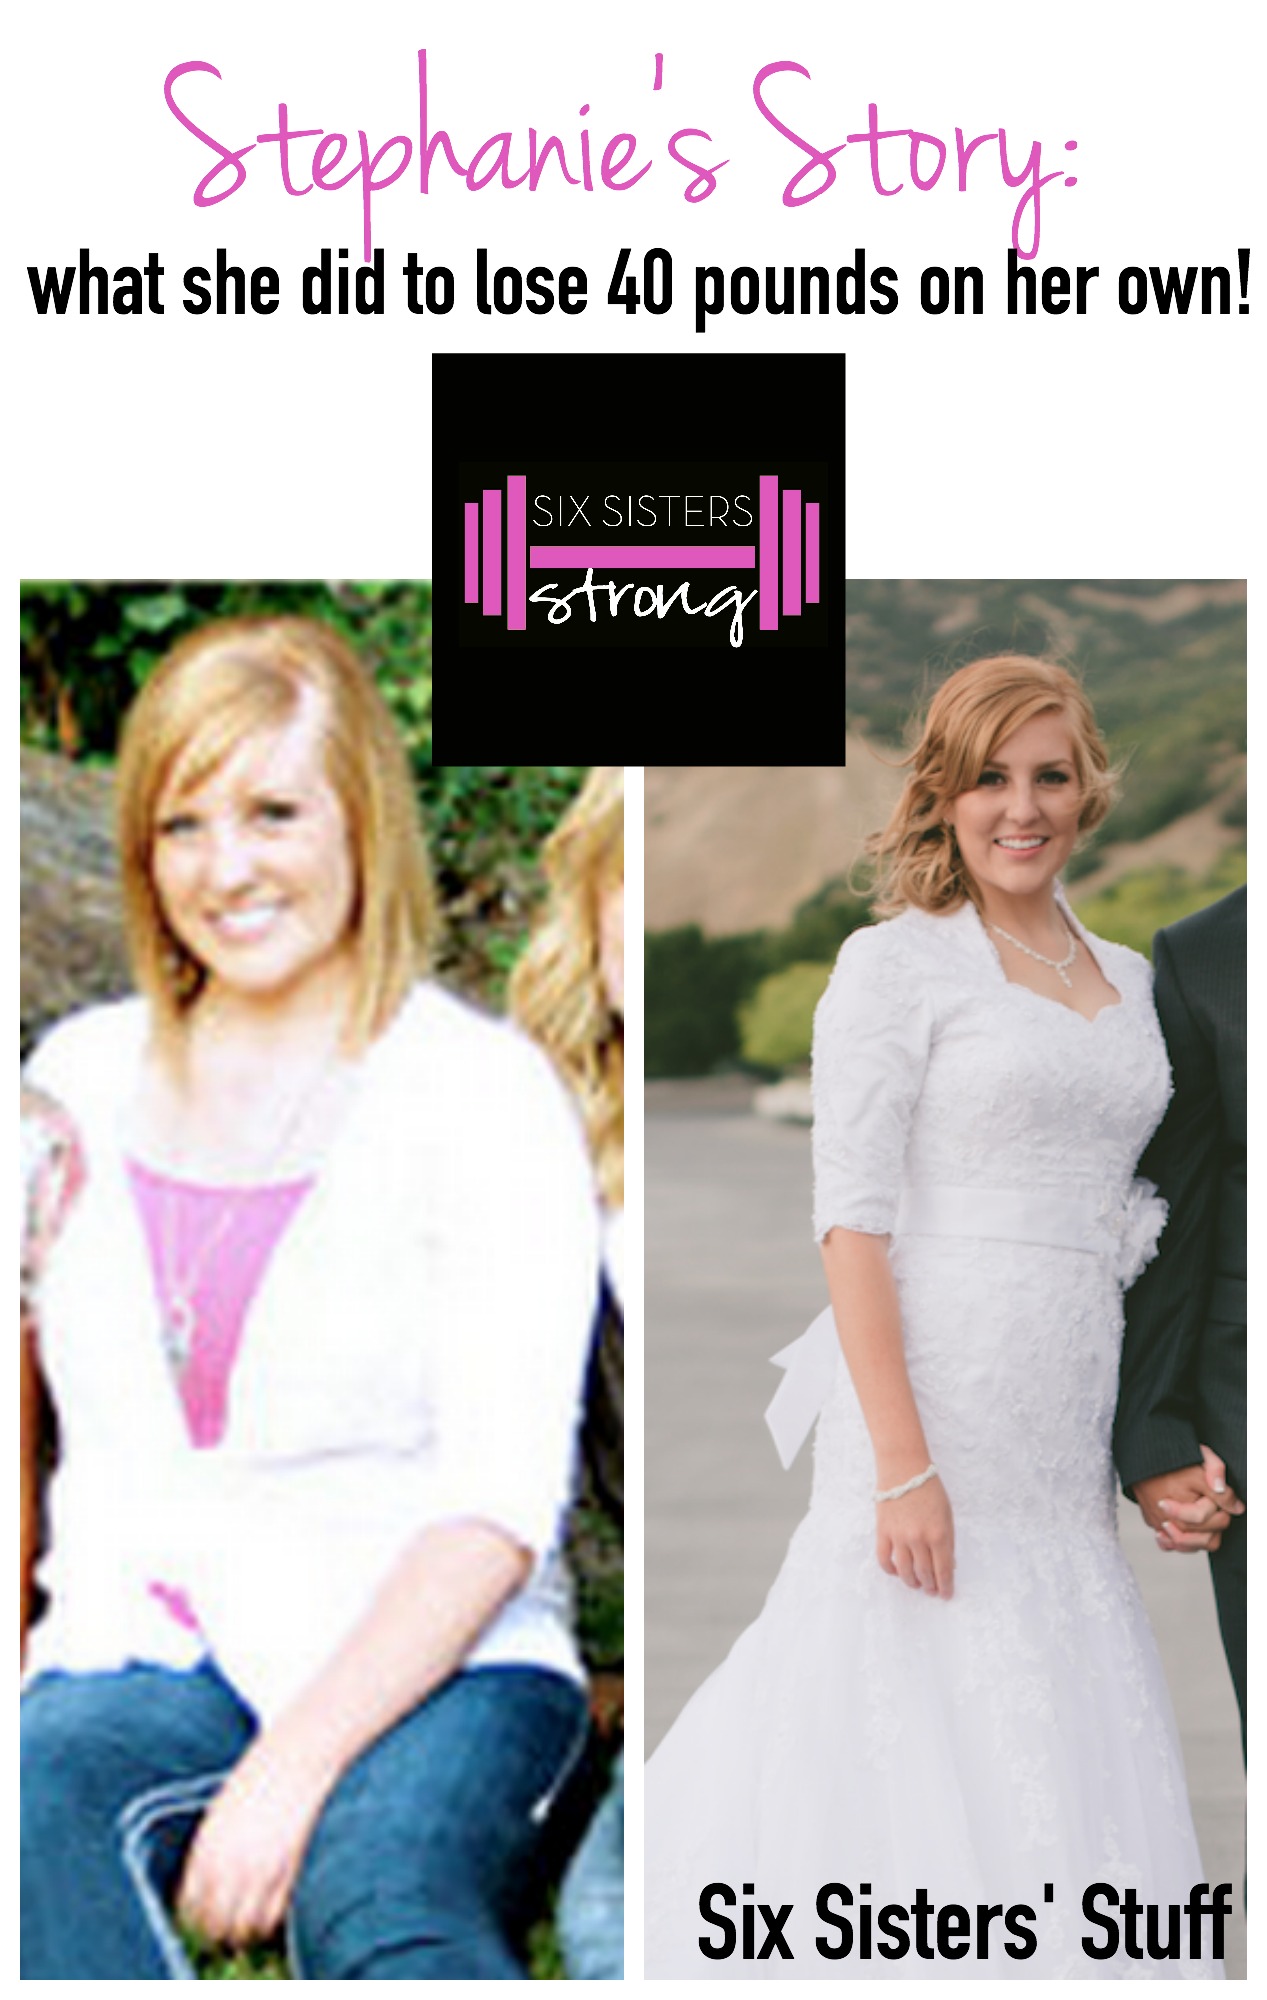 Six Sisters’ Strong – Stephanie’s Story (and how to start working out)